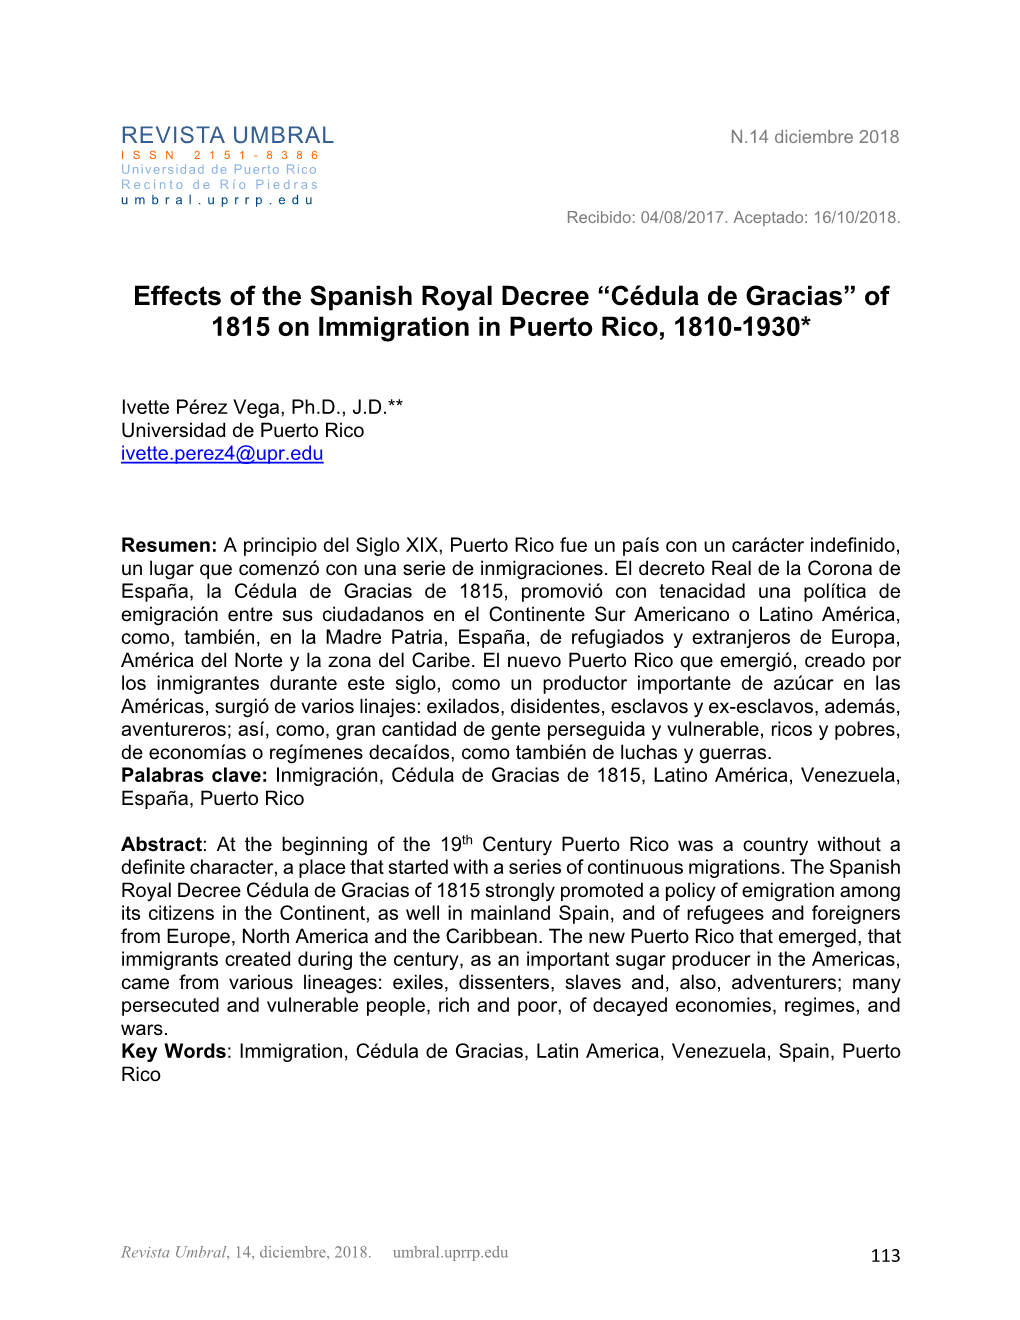 Of 1815 on Immigration in Puerto Rico, 1810-1930*